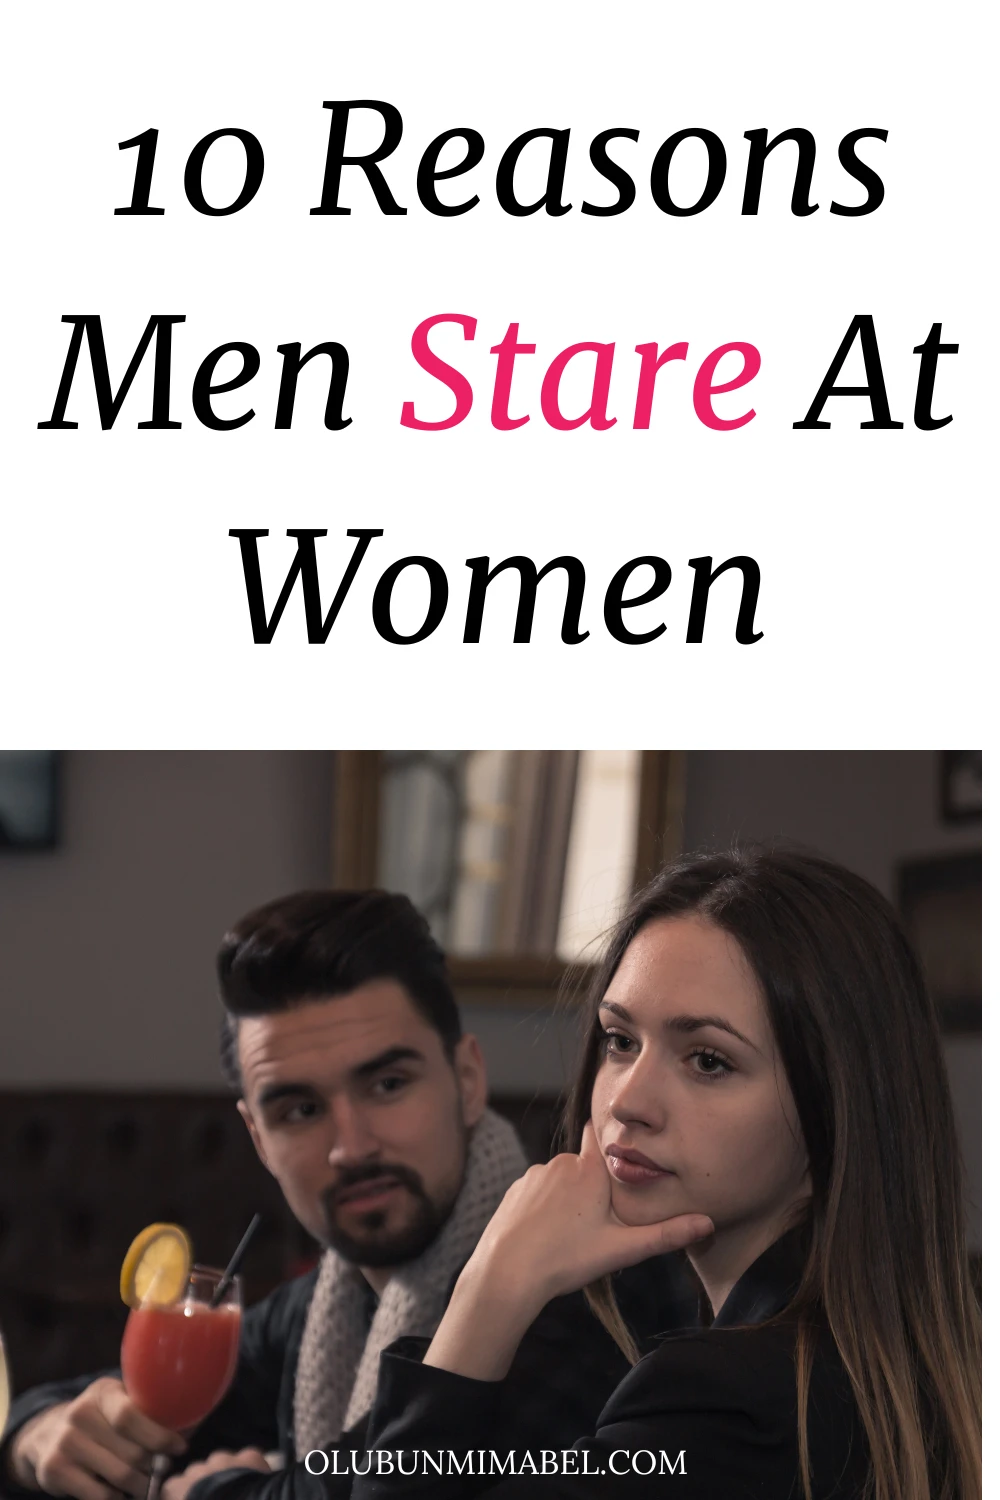 Why Do Men Stare At Women? 